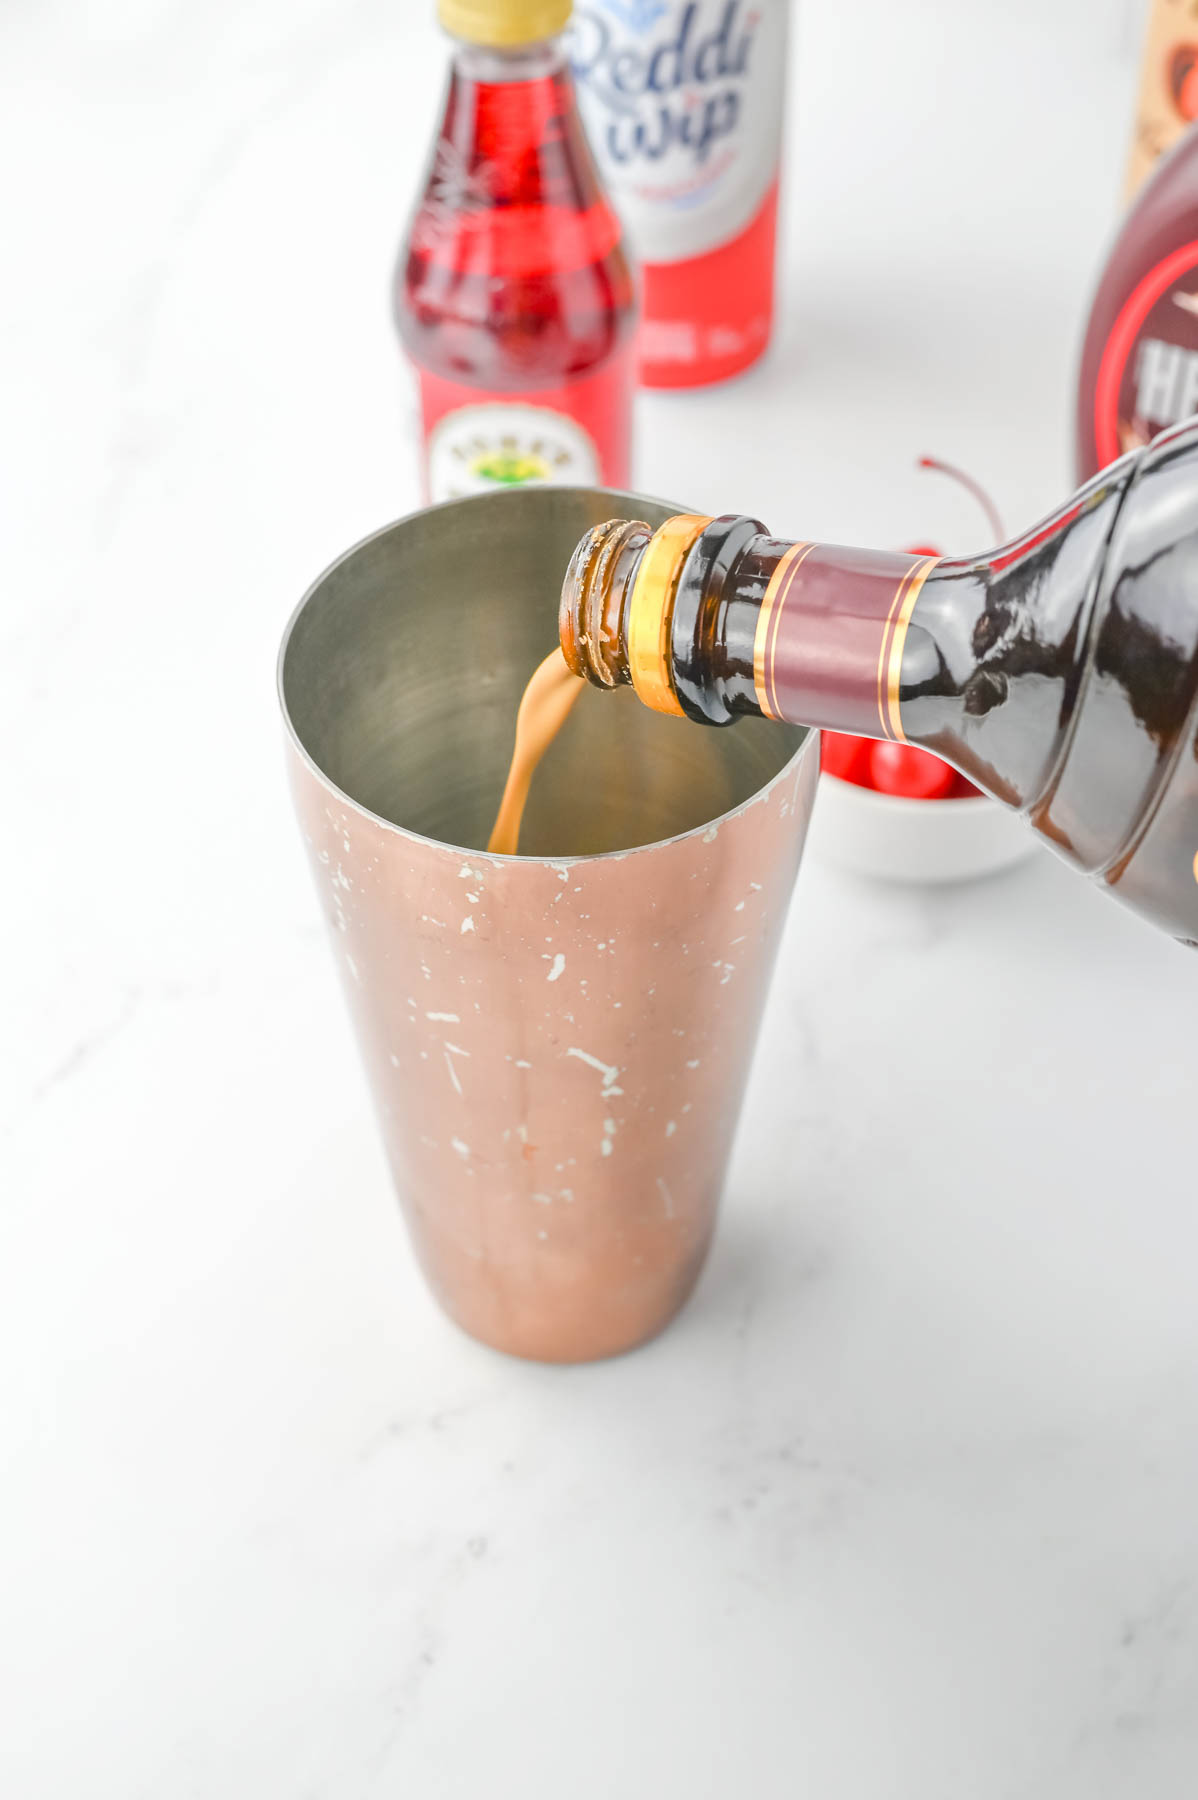 A copper cup is being filled with a drink.